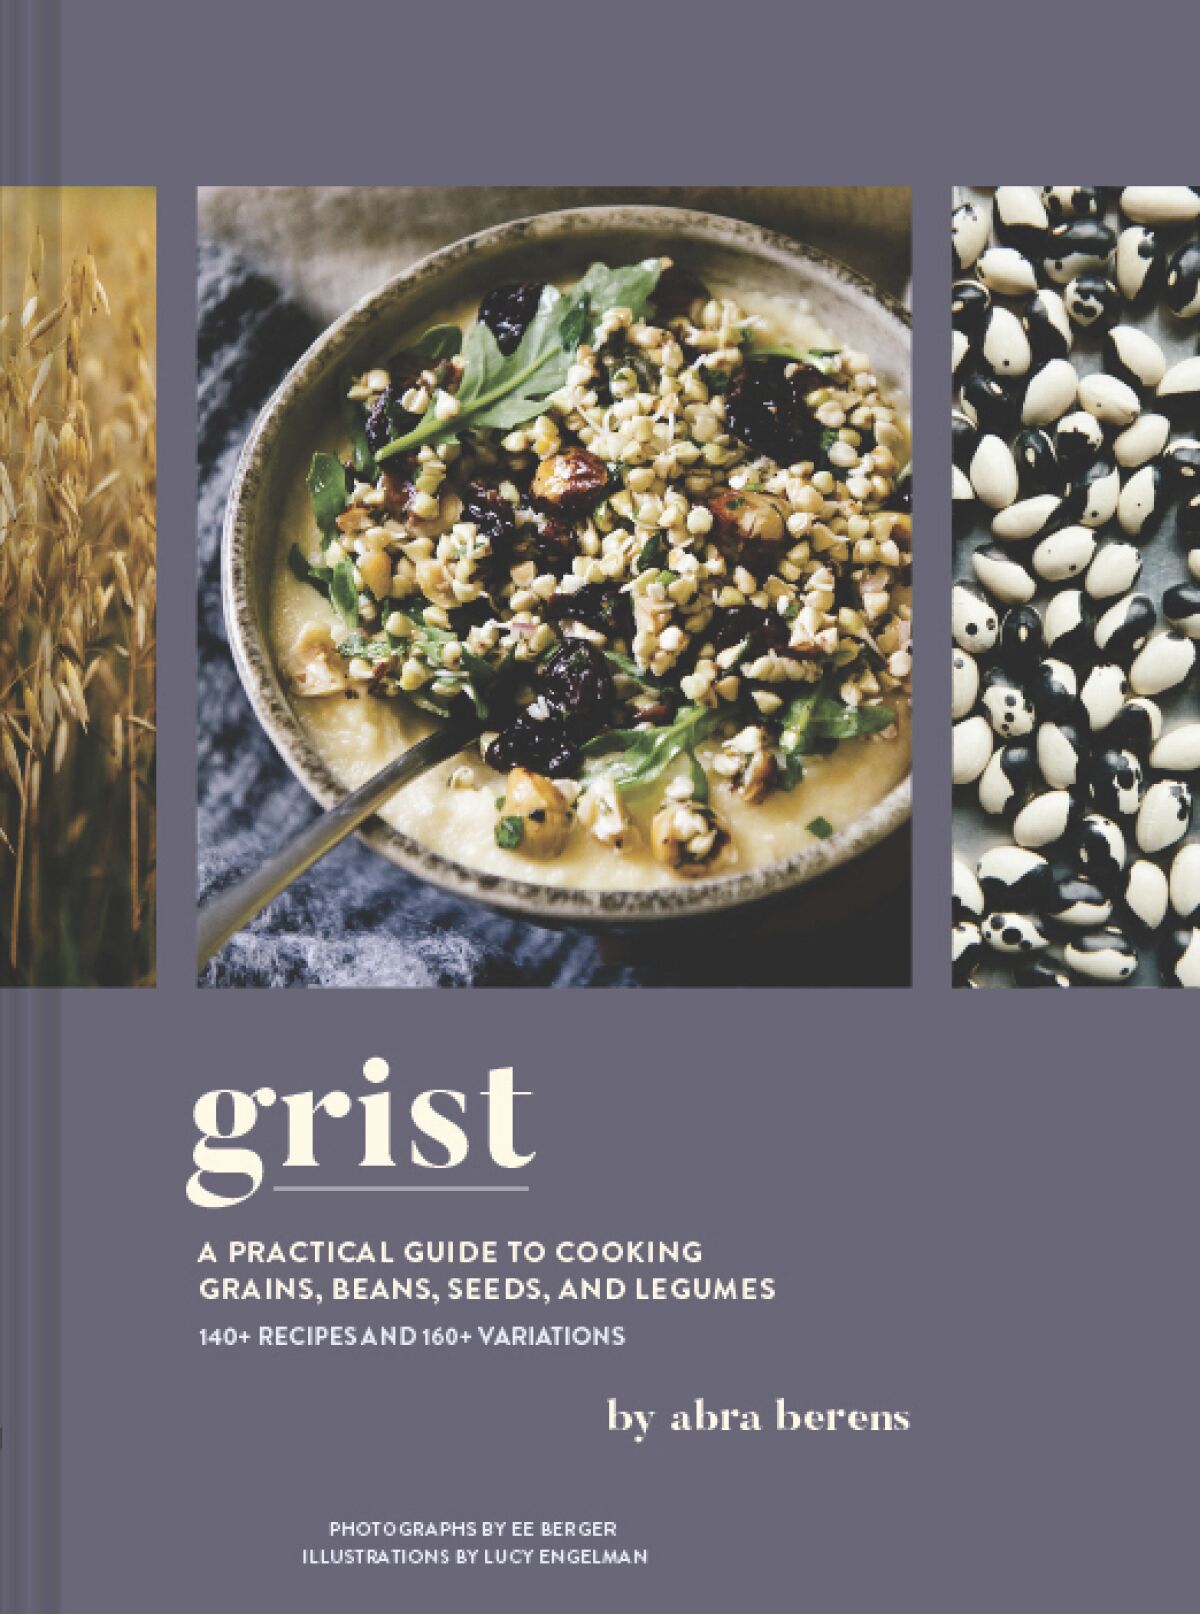 This cover image released by Chronicle Books shows "Grist: A Practical Guide to Cooking Grains, Beans, Seeds, and Legumes" by Abra Berens. (Chronicle Books via AP)